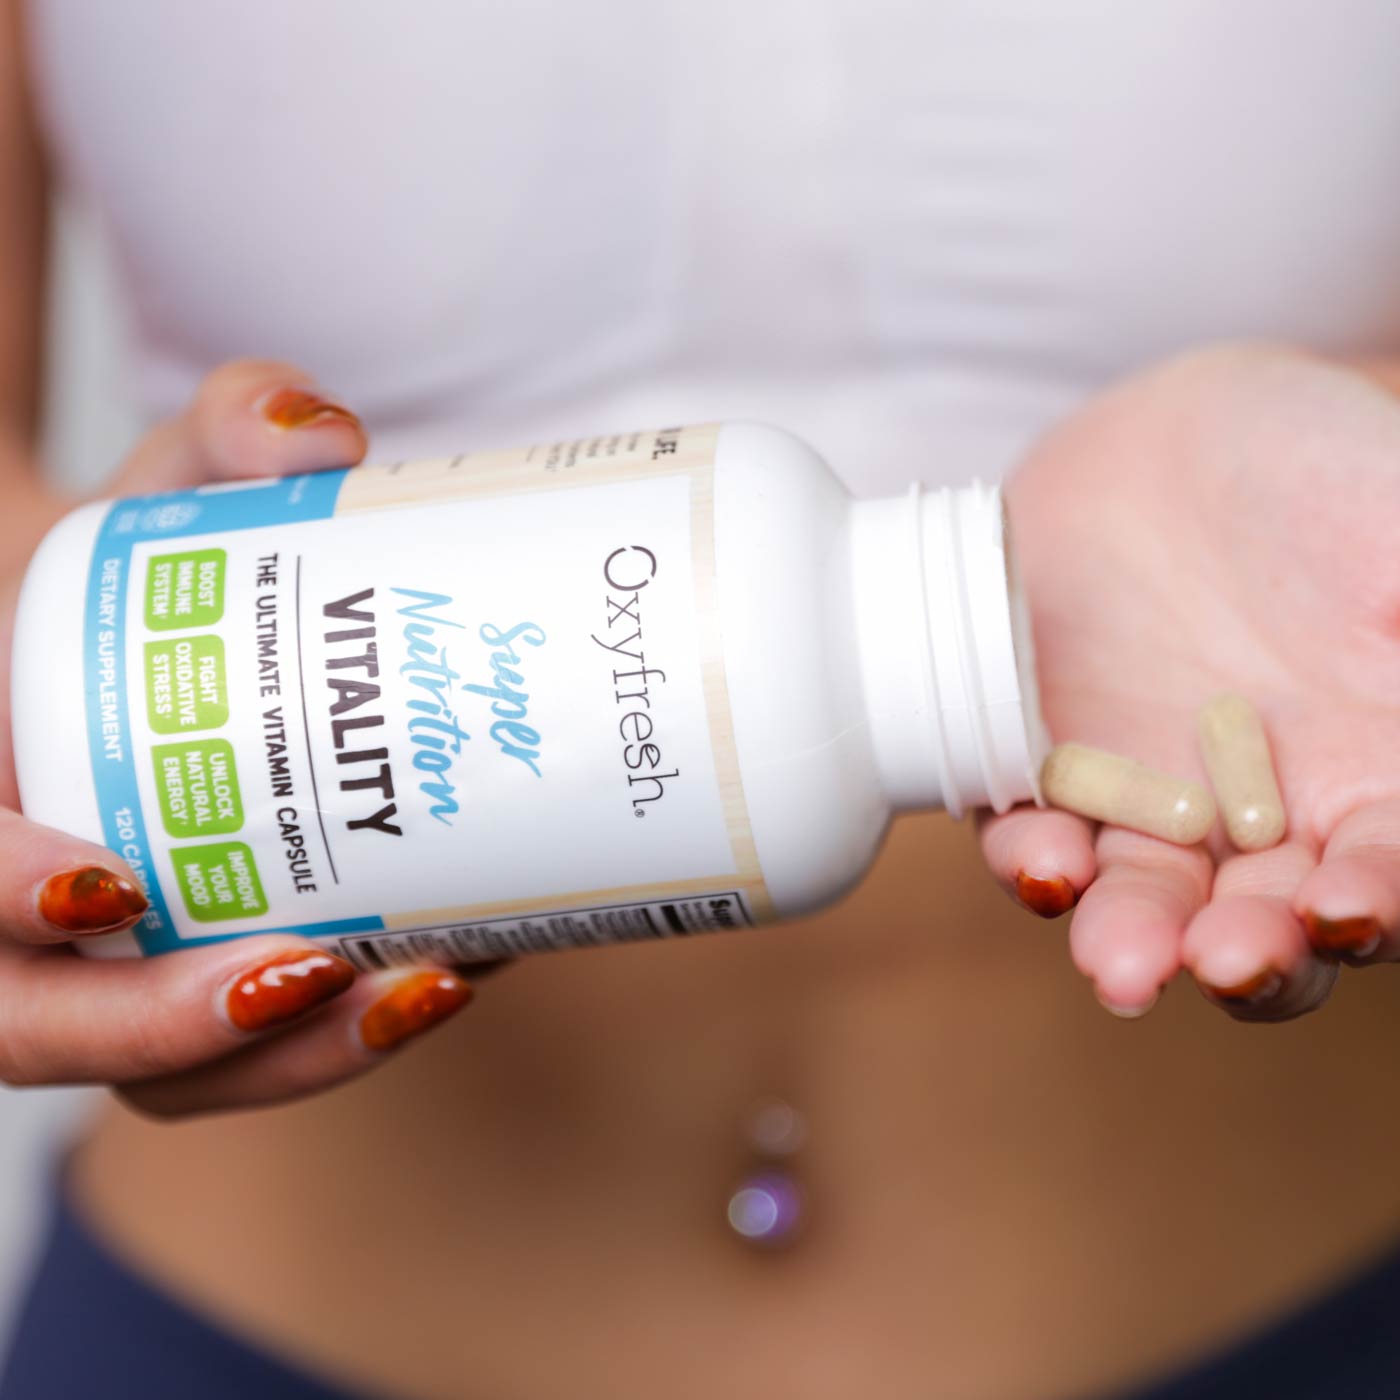 Woman-in-workout-clothes-holding-bottle-of-oxyfresh-vitality-supplement-super-nutrition-vitamin-capsules